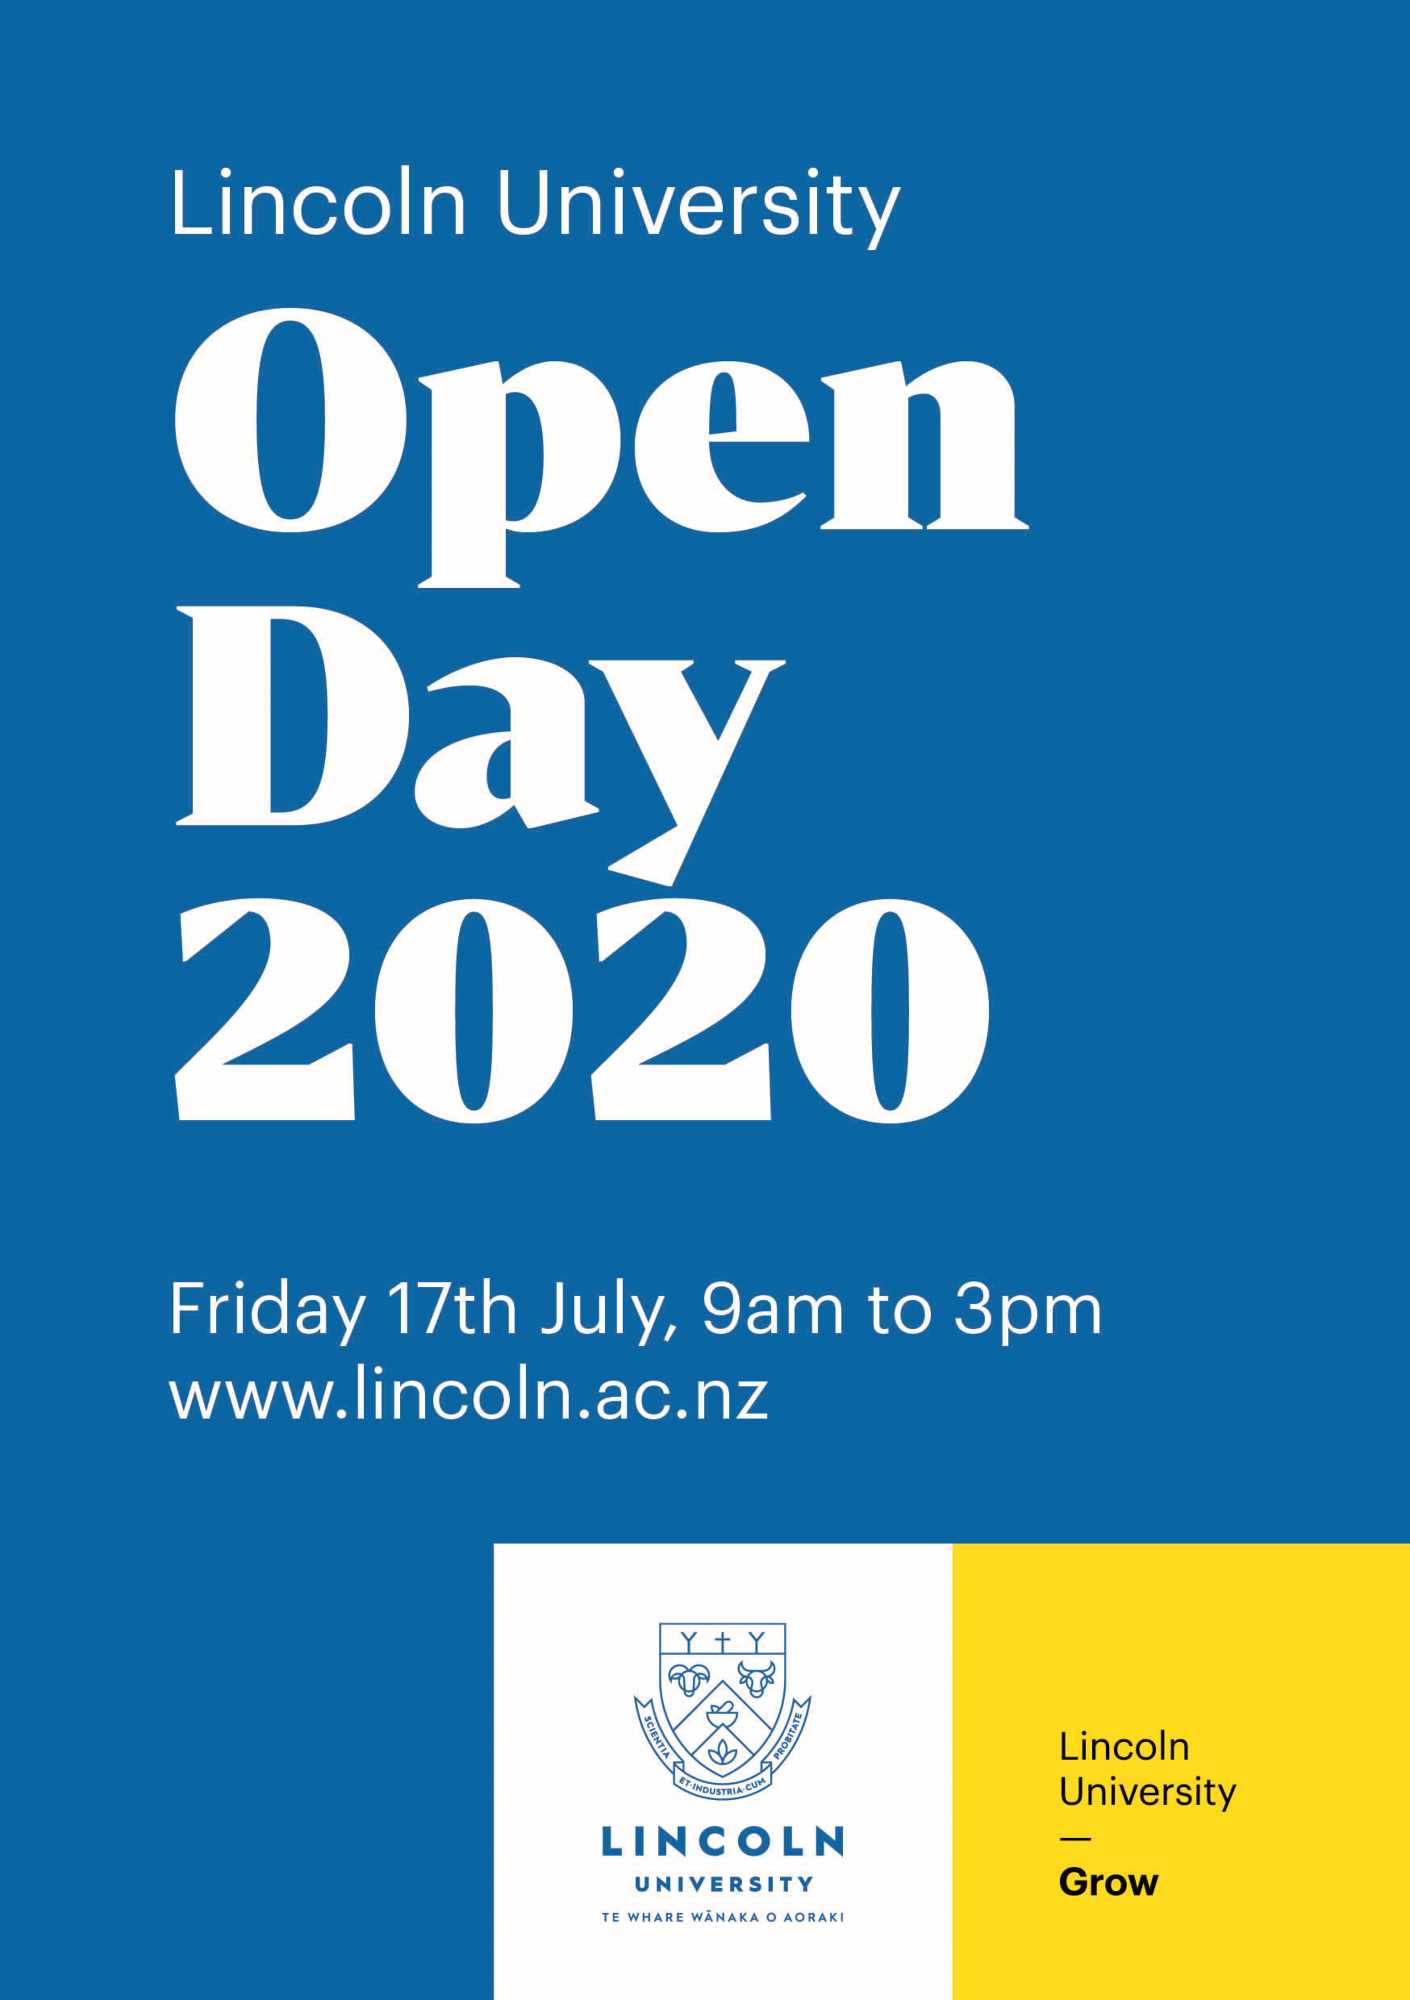 Lincoln University Open Day 2020